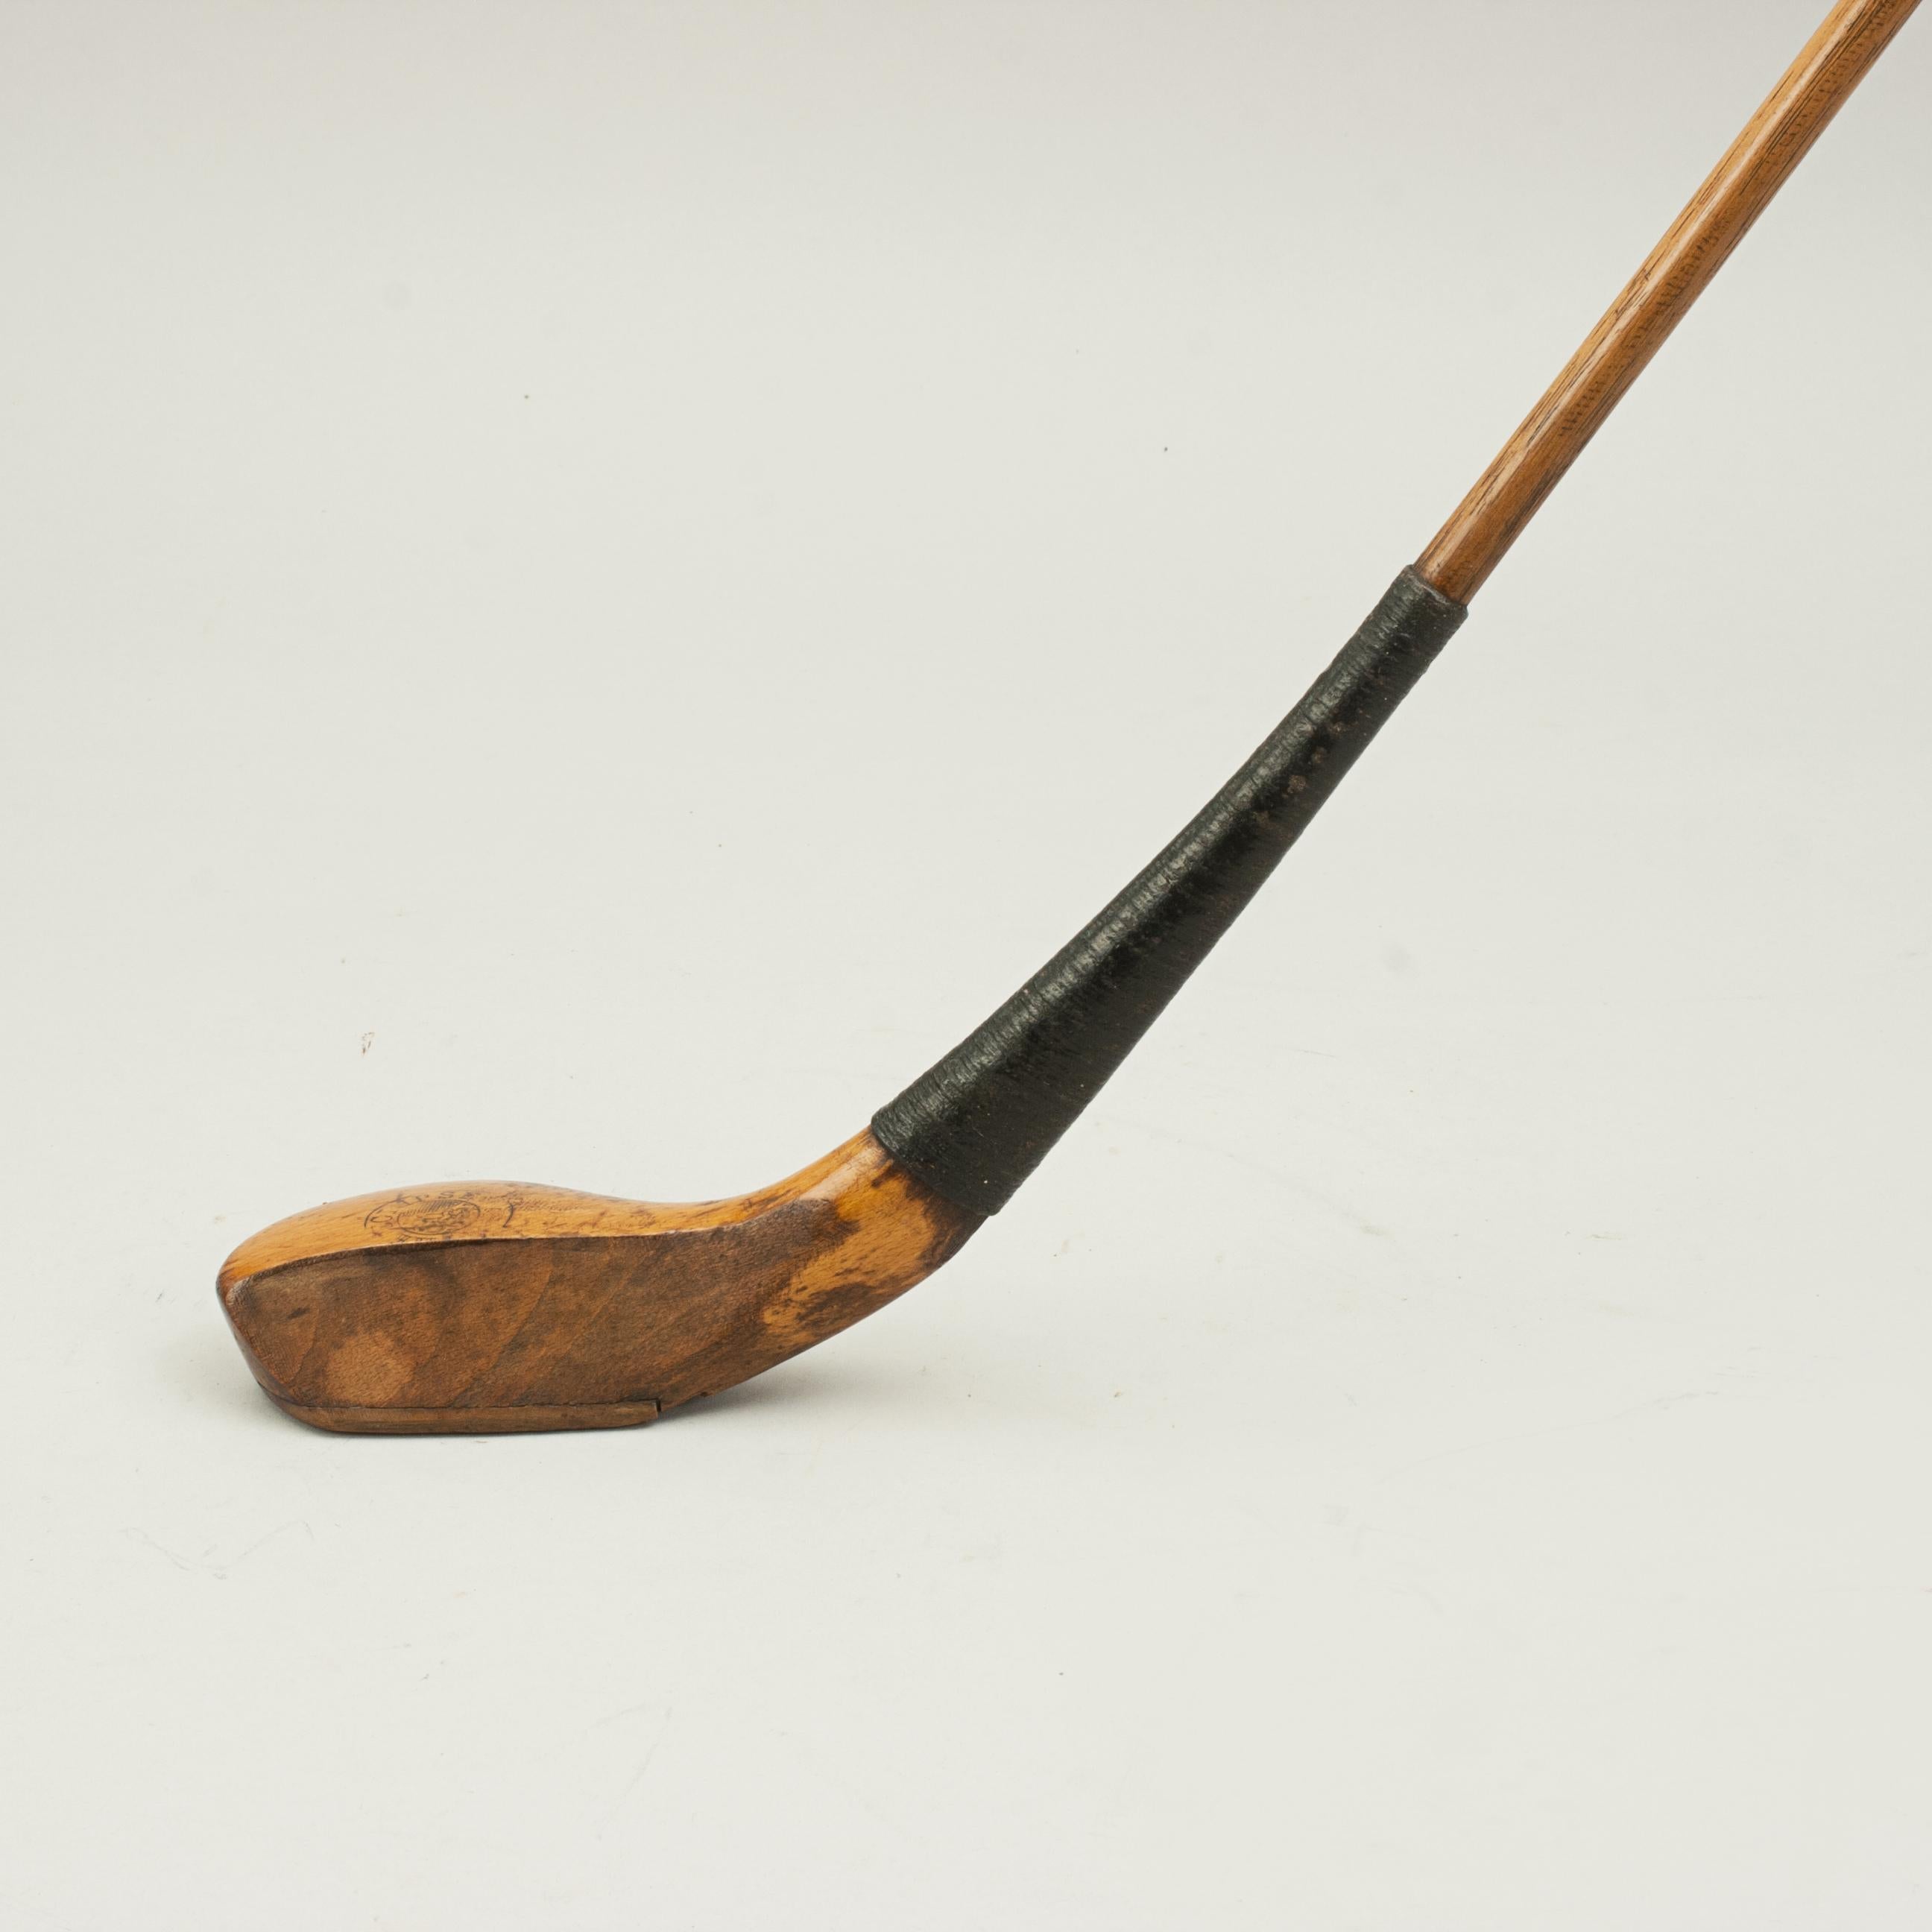 Antique Scared Head Long Nose Golf Club.
A long nose lofted club in great condition, maker unknown. The golf club has a blond beech-wood head with lead weight to the rear, traditional horn slip along the leading edge of the sole, head stamped 'The